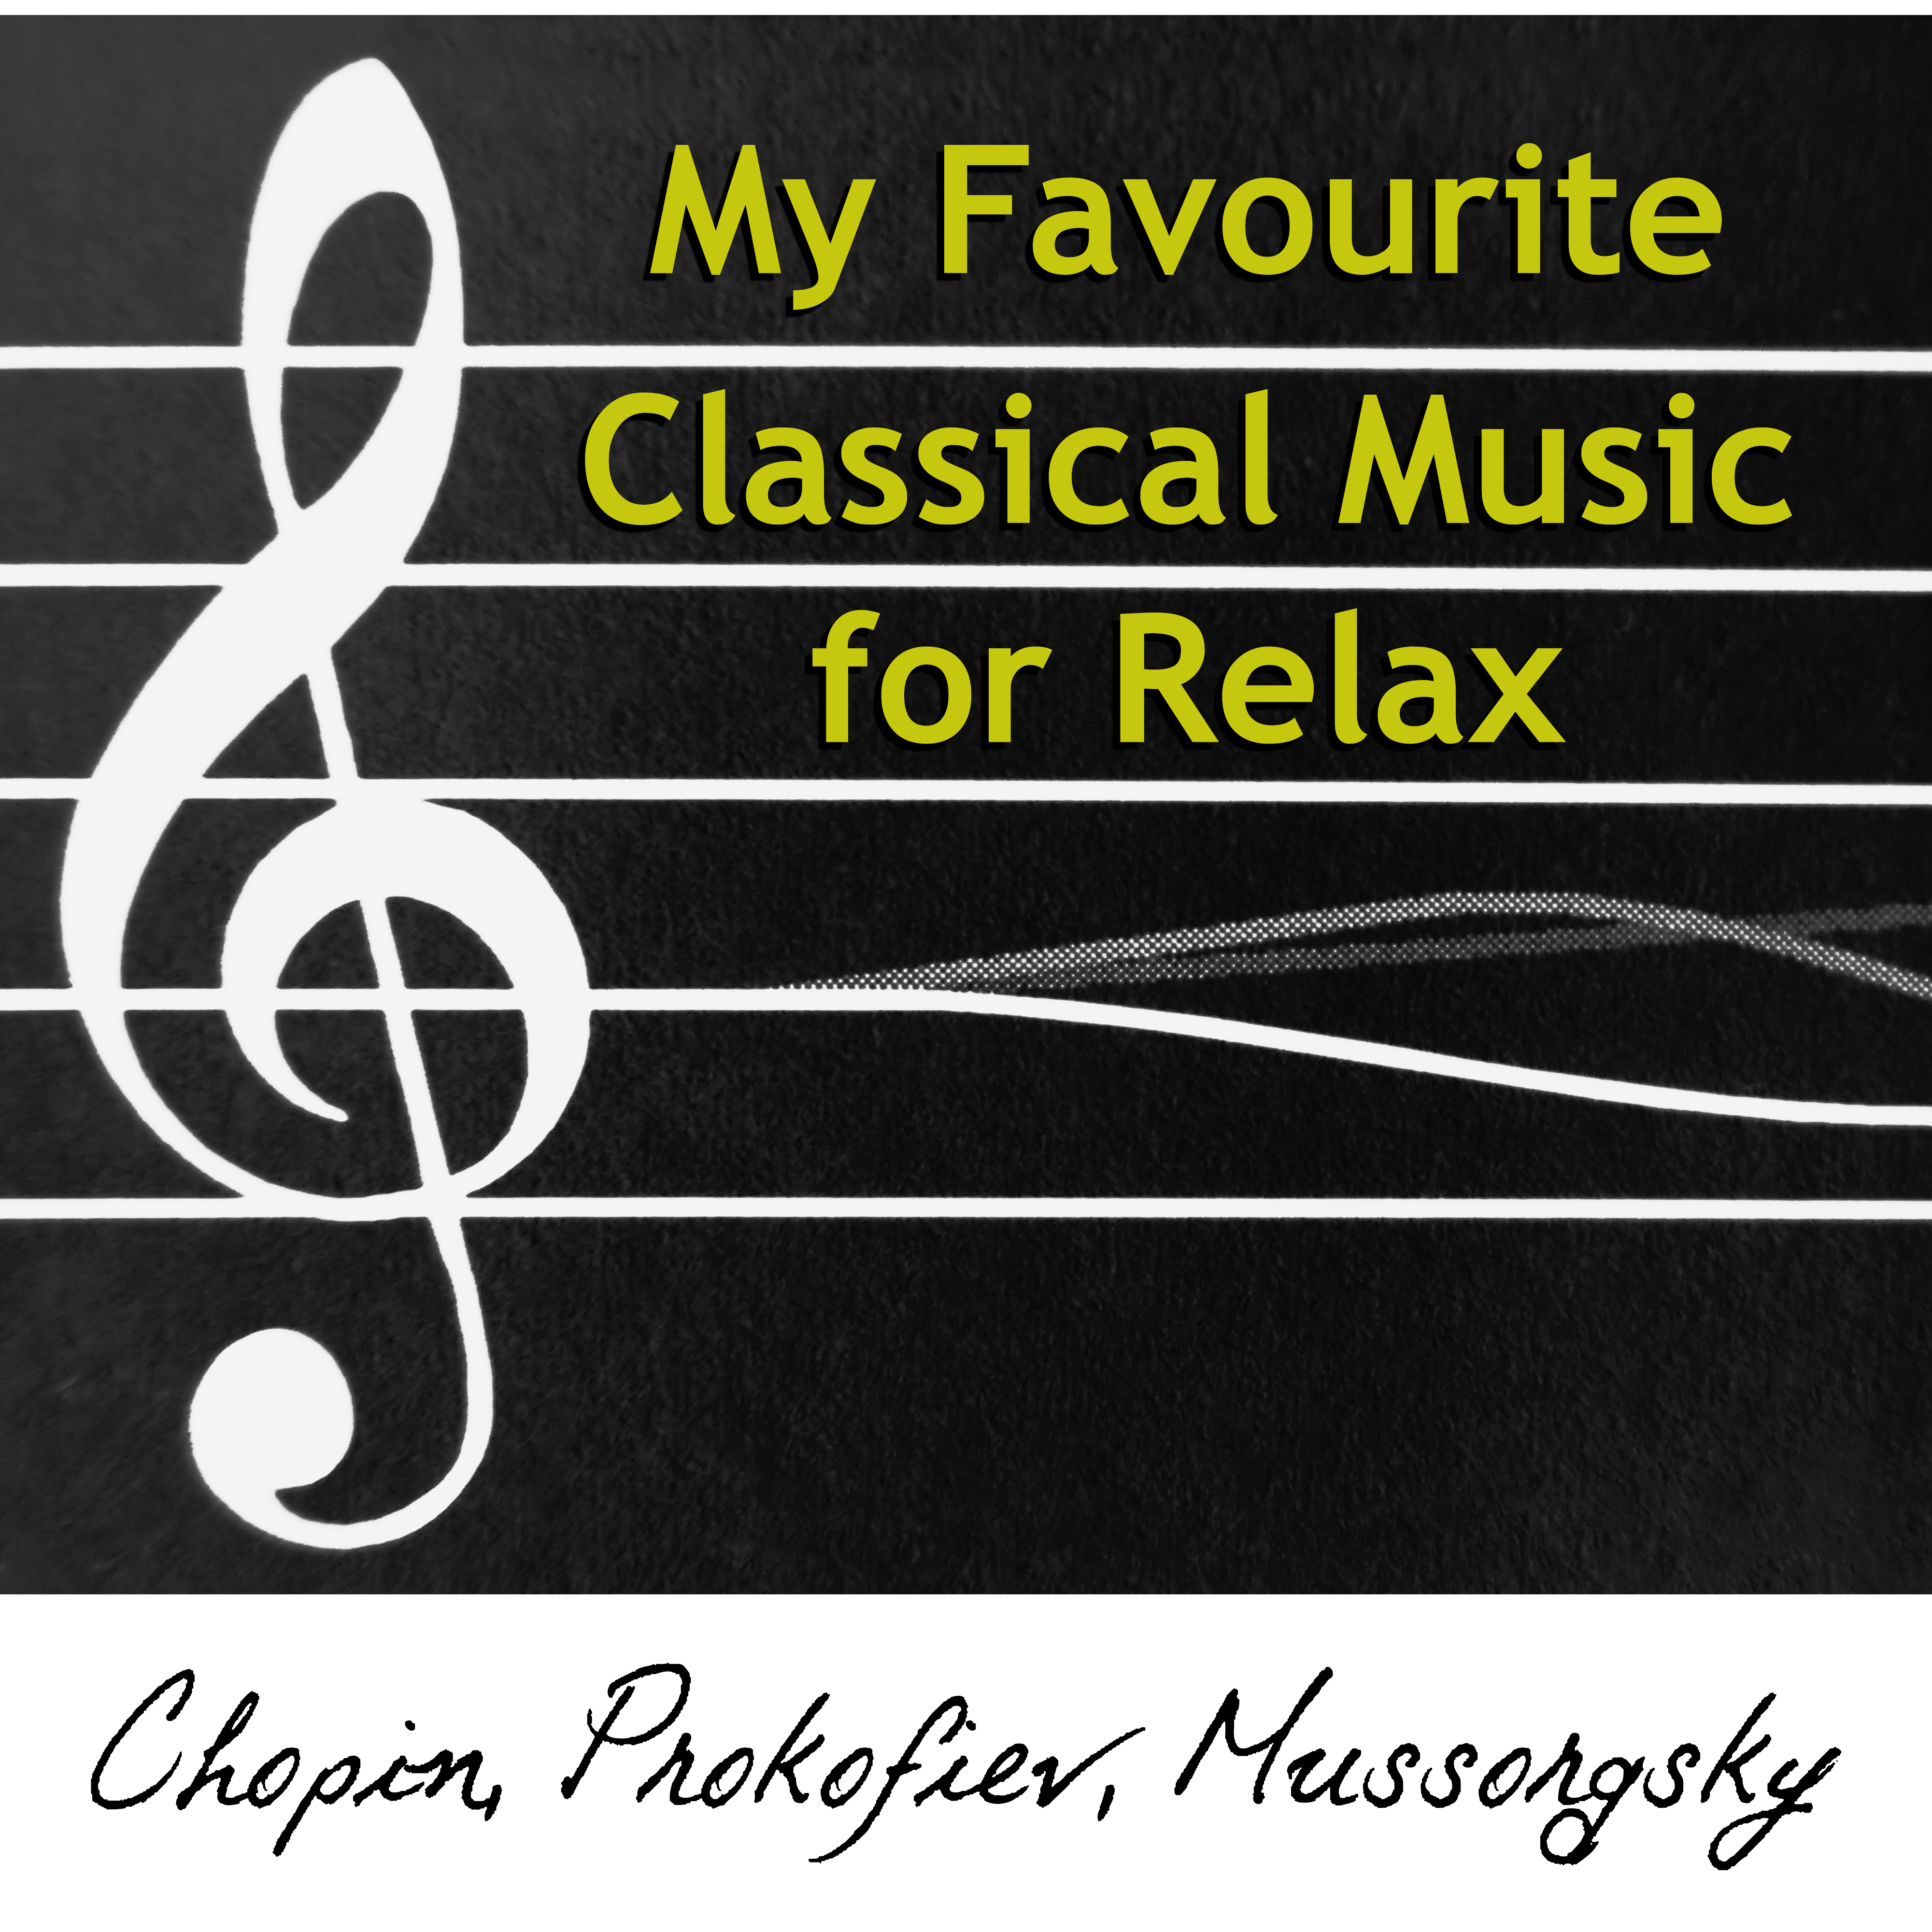 My Favourite Classical Music for Relax - Lounge Chill Out with Chopin, Prokofiev, Mussorgsky